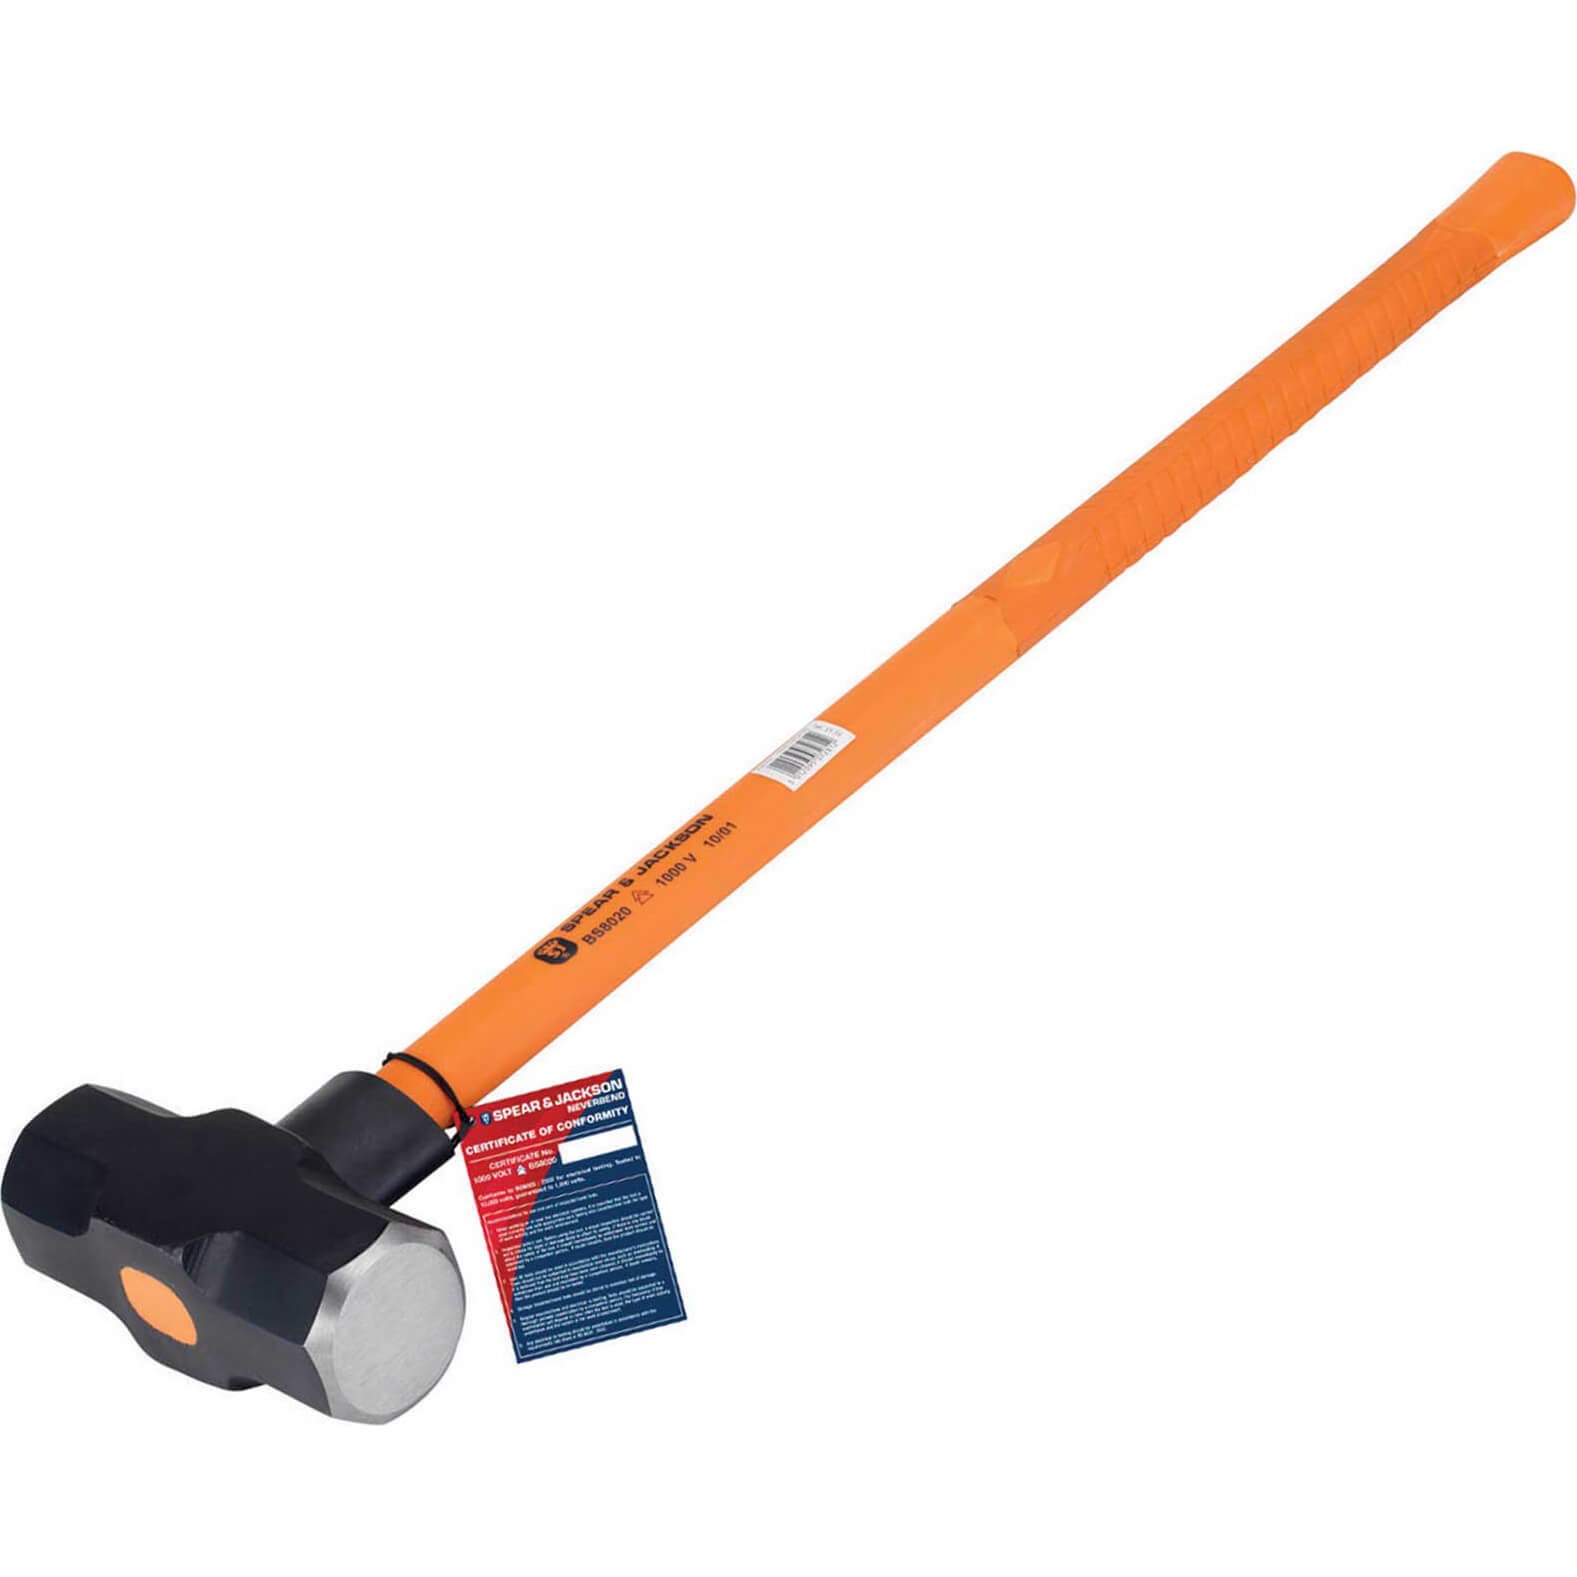 Image of Spear and Jackson Insulated Sledge Hammer 6.4kg